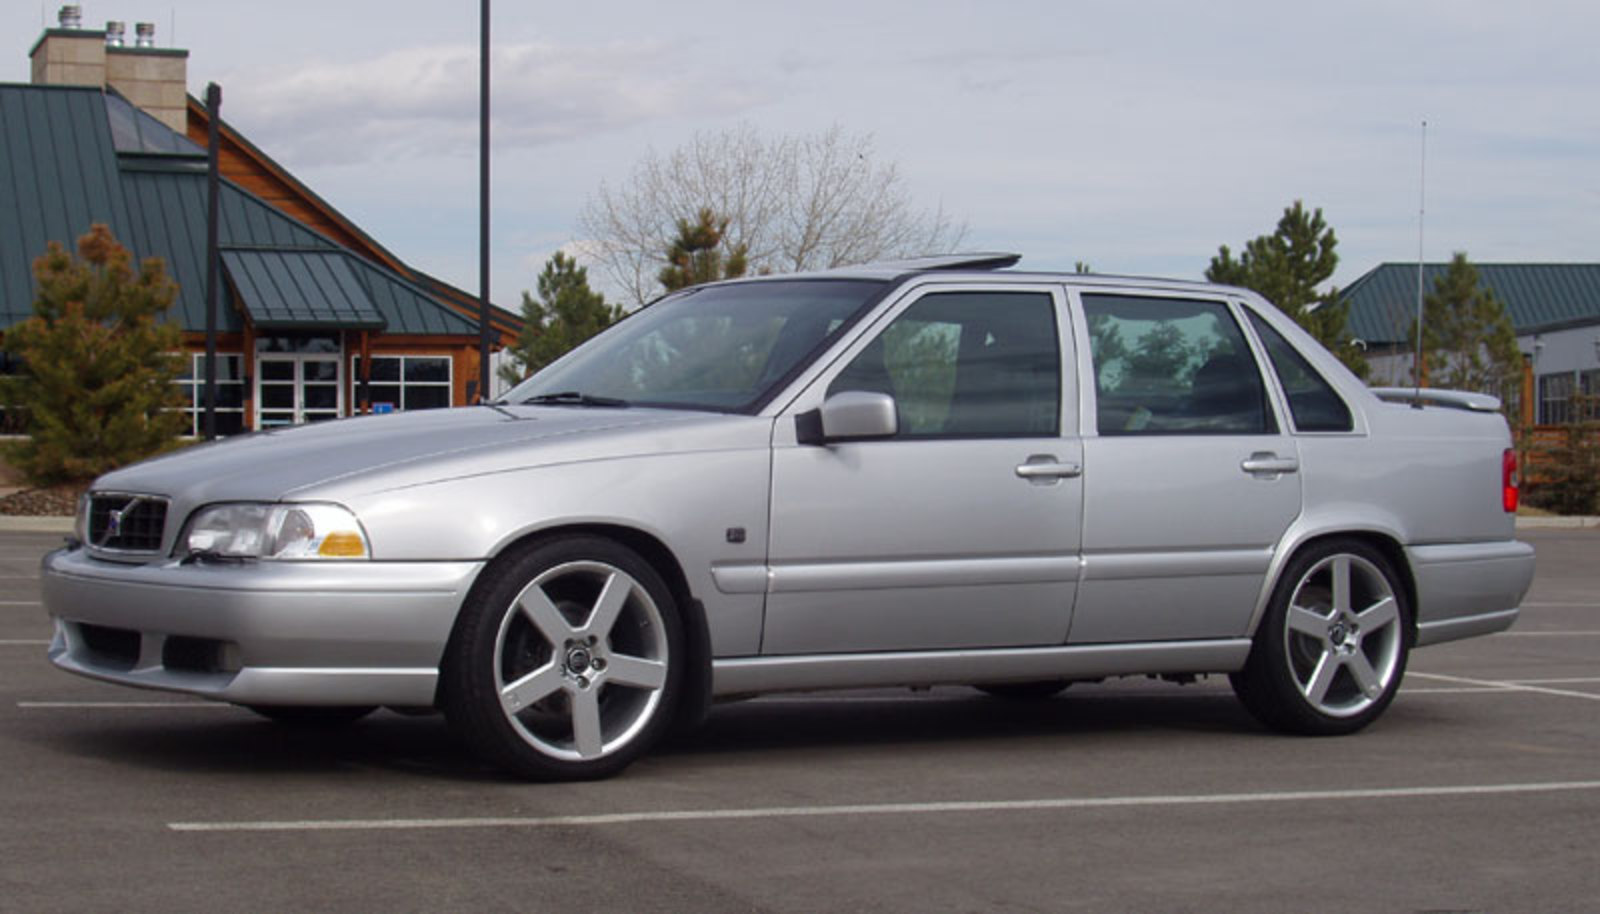 Volvo s70 t5 (469 comments) Views 2862 Rating 22